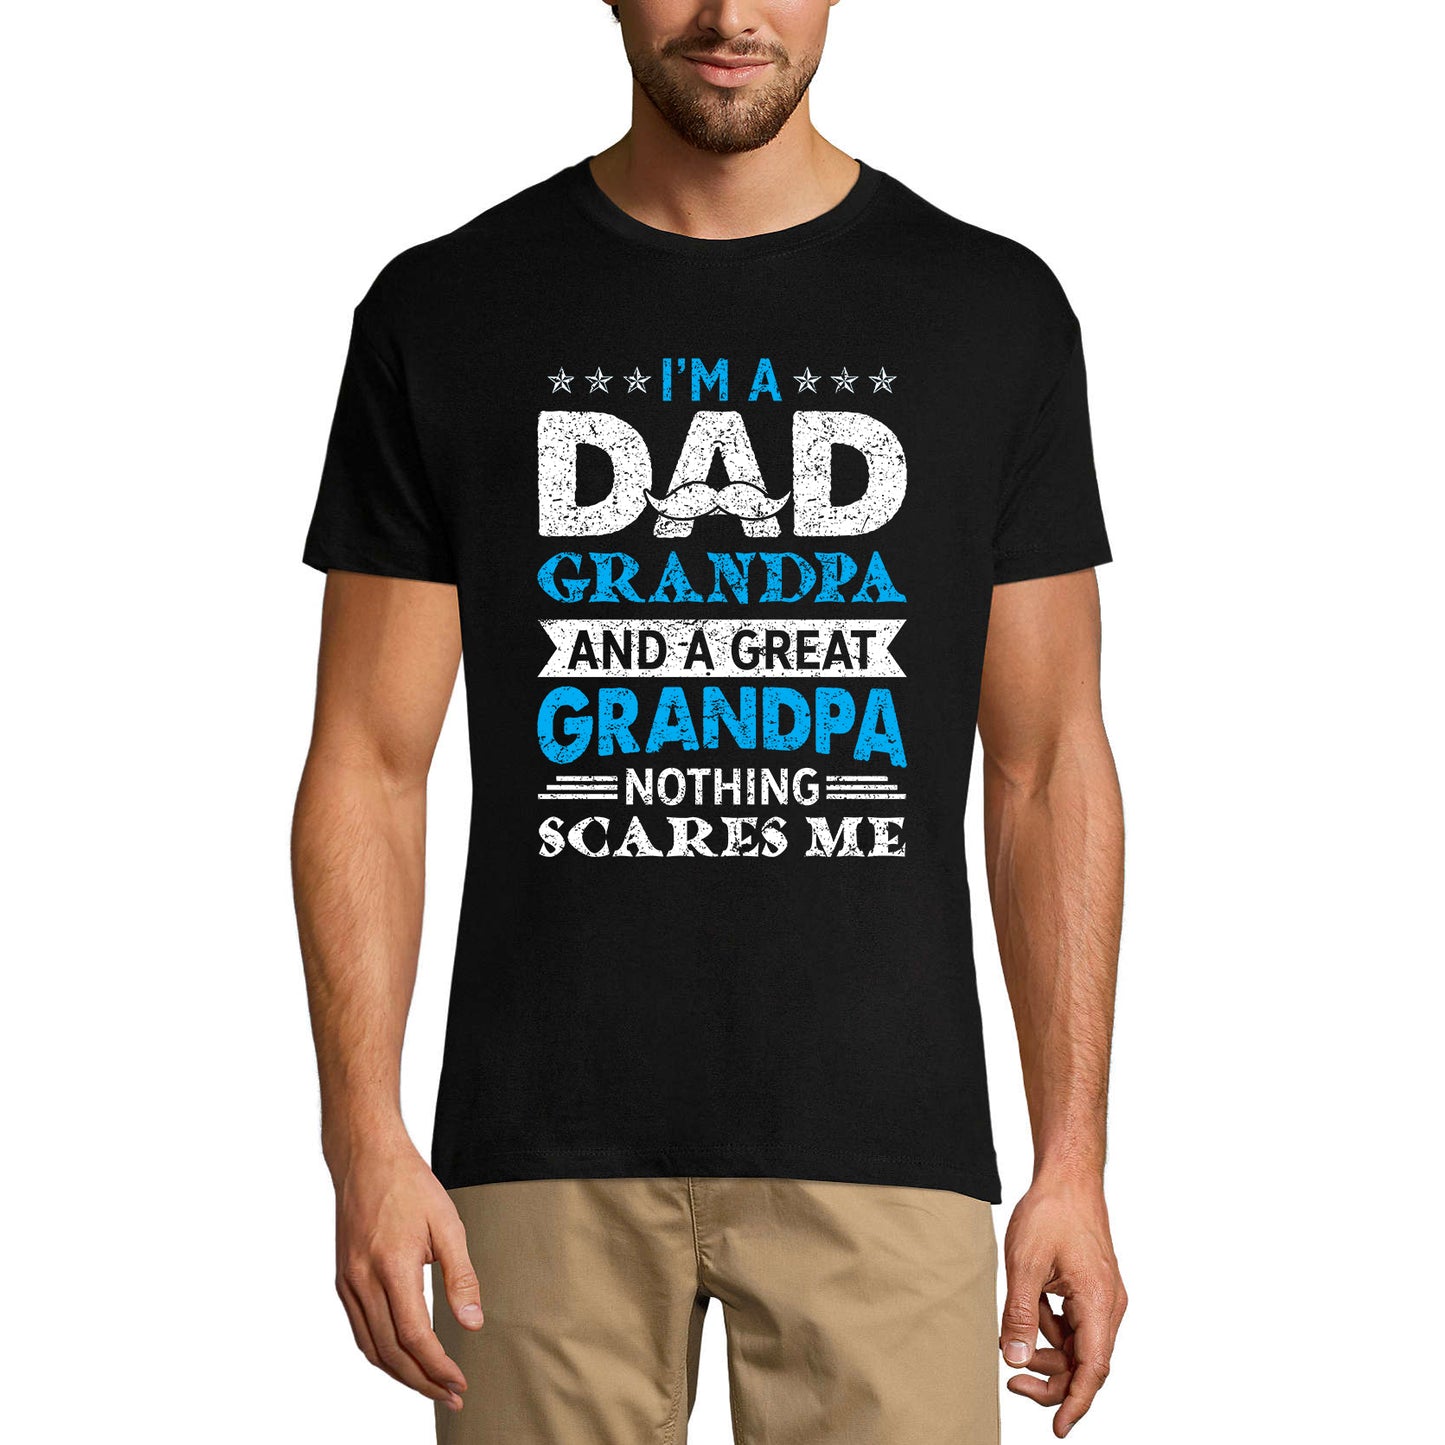 ULTRABASIC Men's Graphic T-Shirt I'm a Dad Grandpa - Nothing Scares Me - Family Time